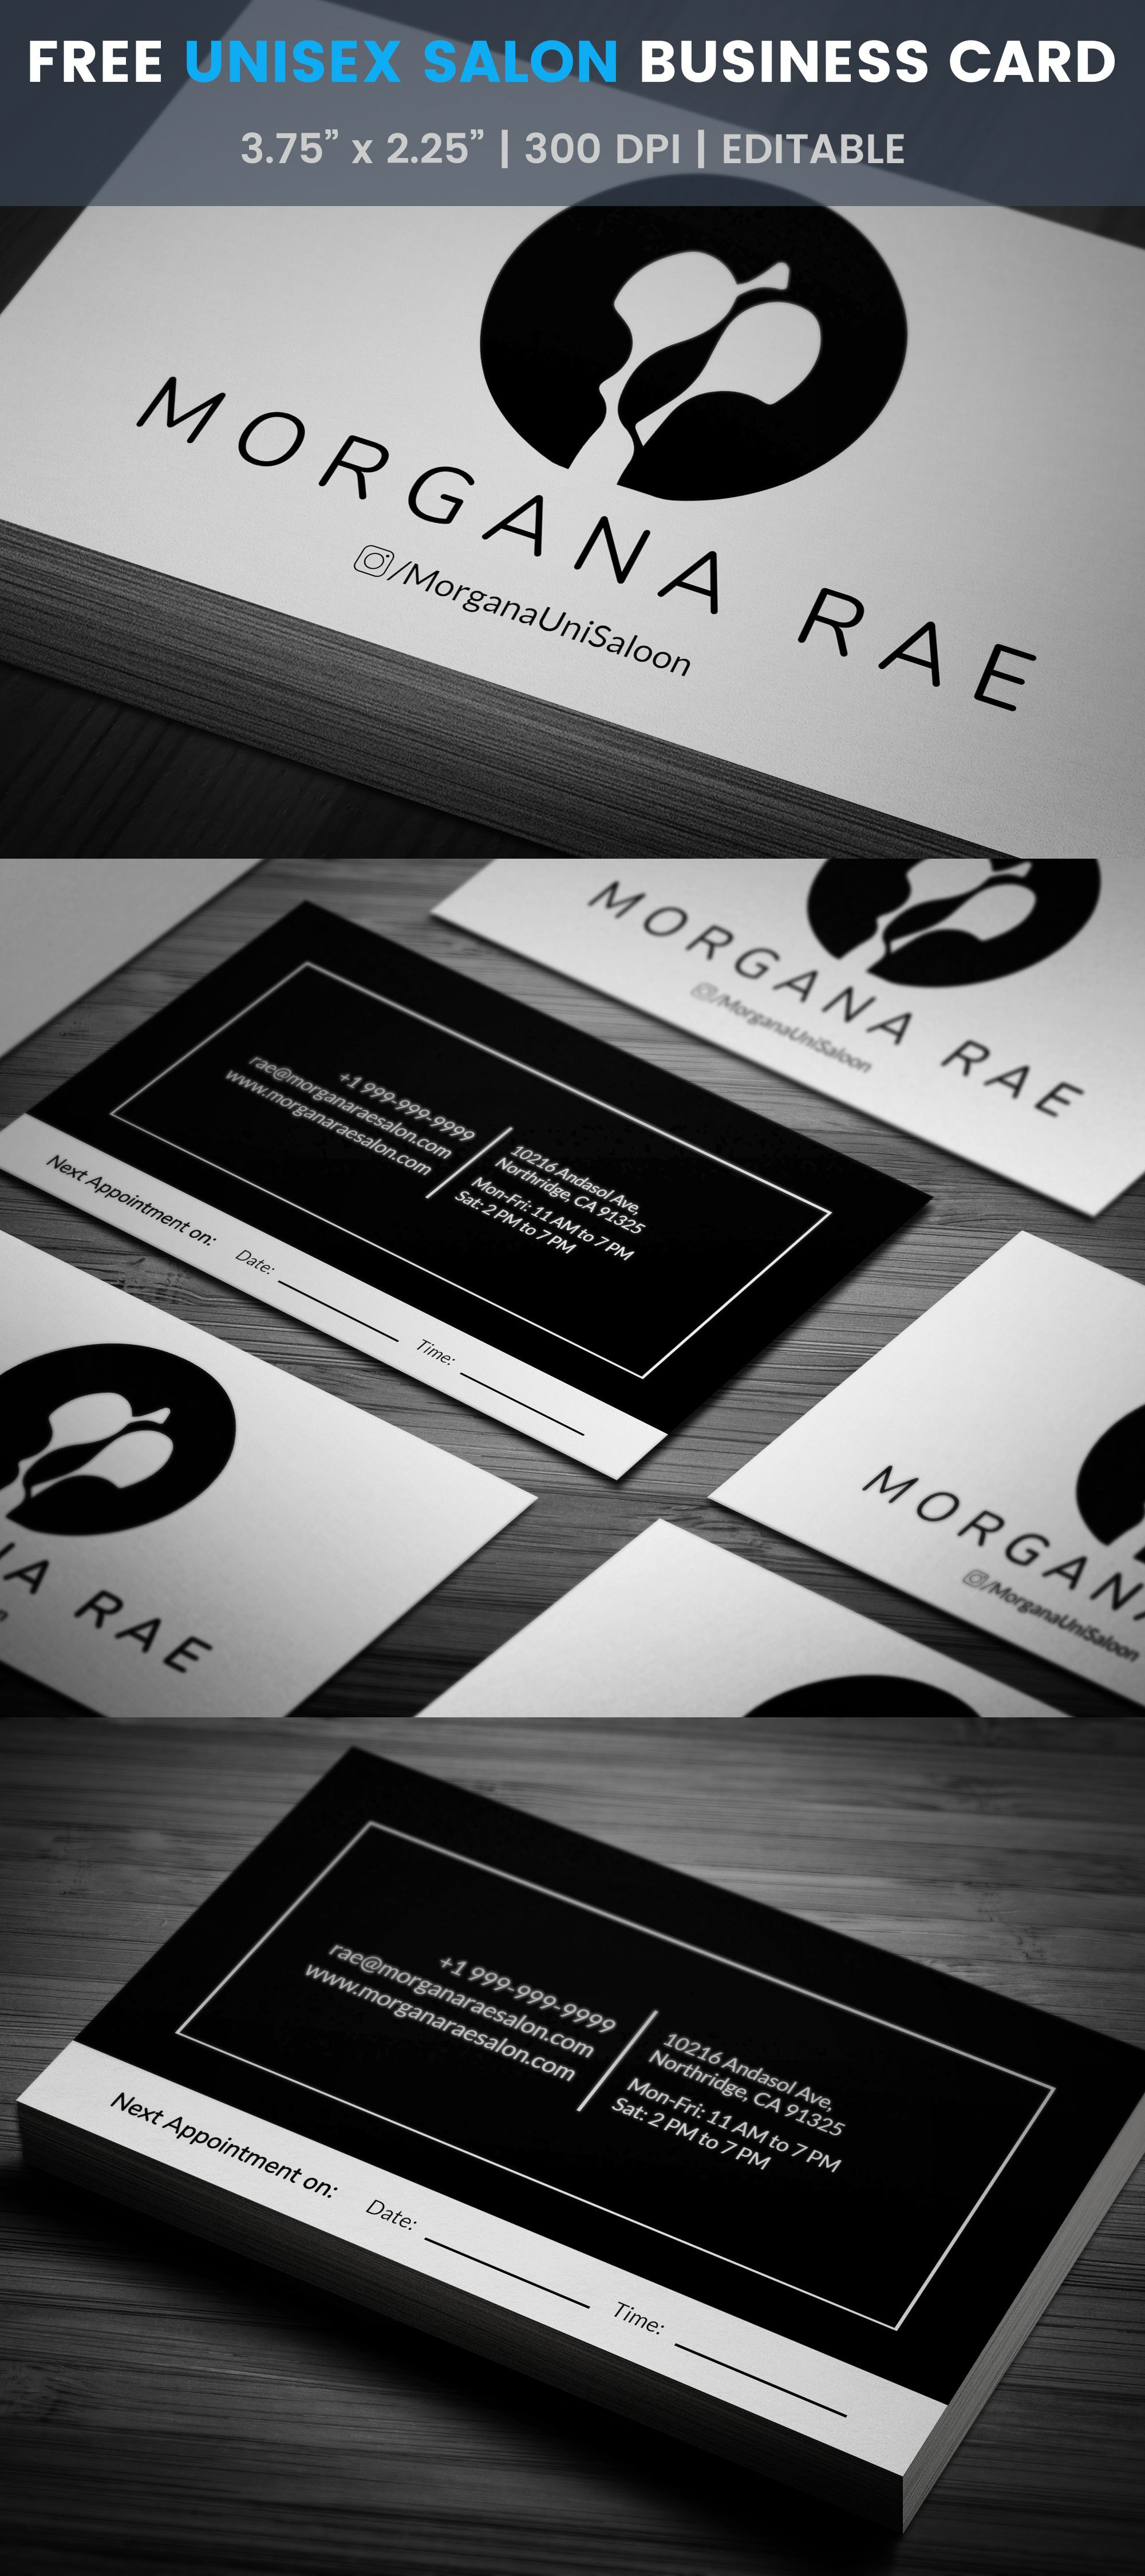 Uni Hair Salon Business Card Template Look Style Of Electrician Business Cards Templates Free